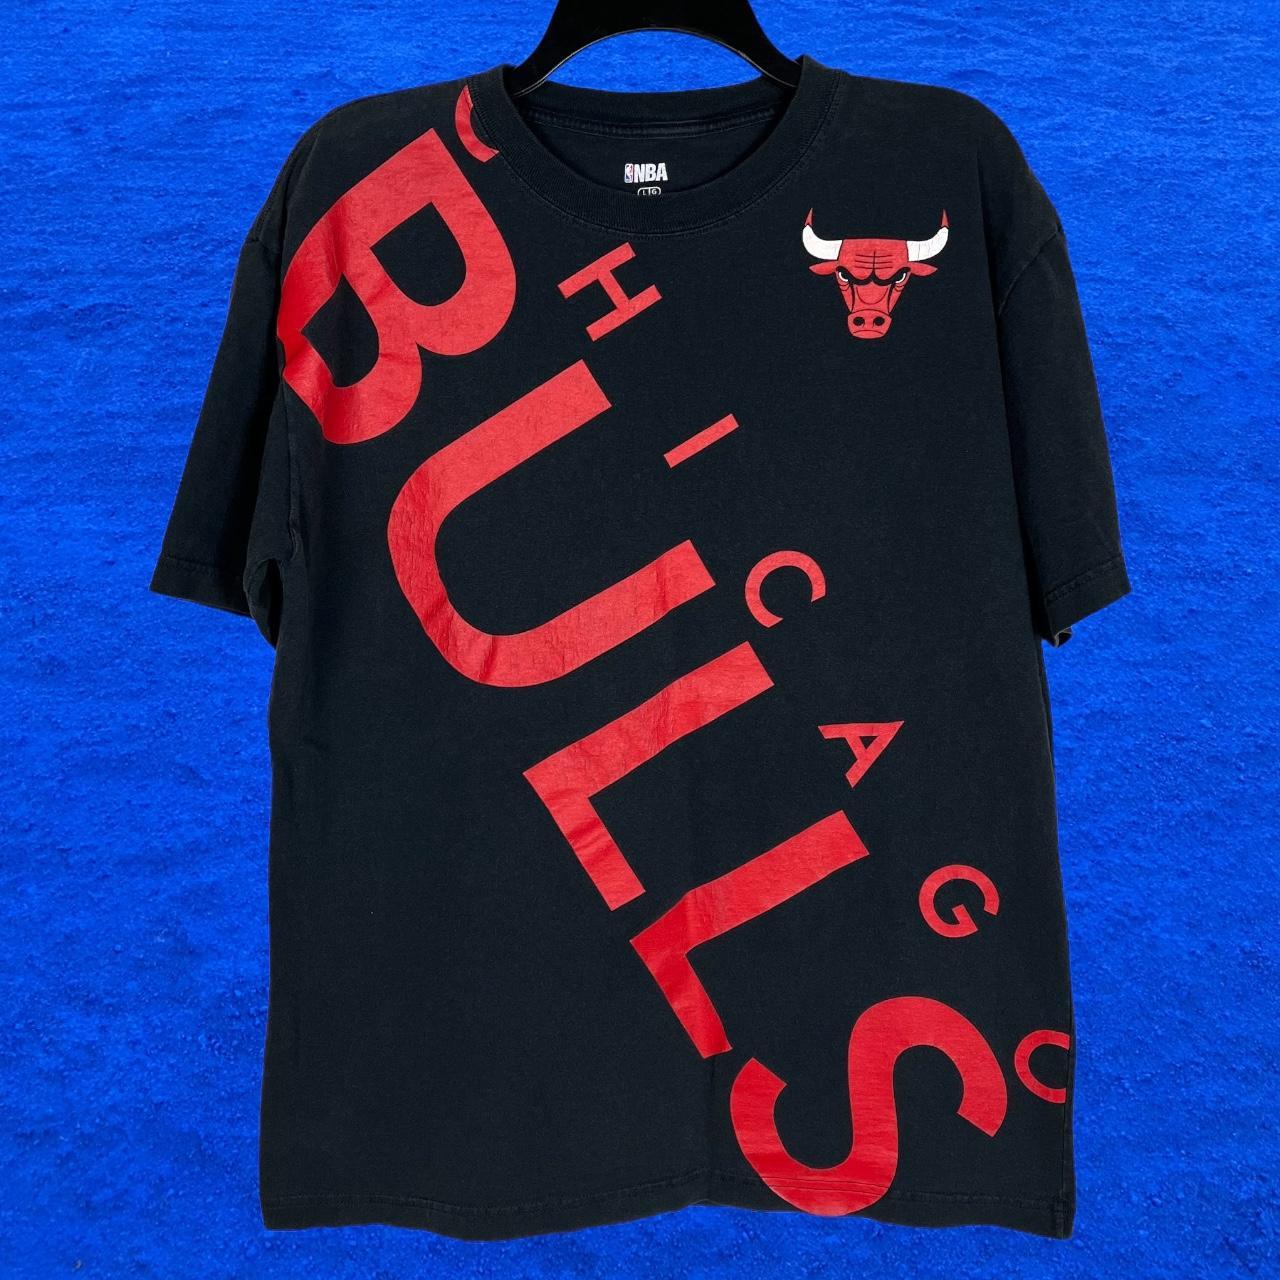 NBA Men's Black and Red T-shirt